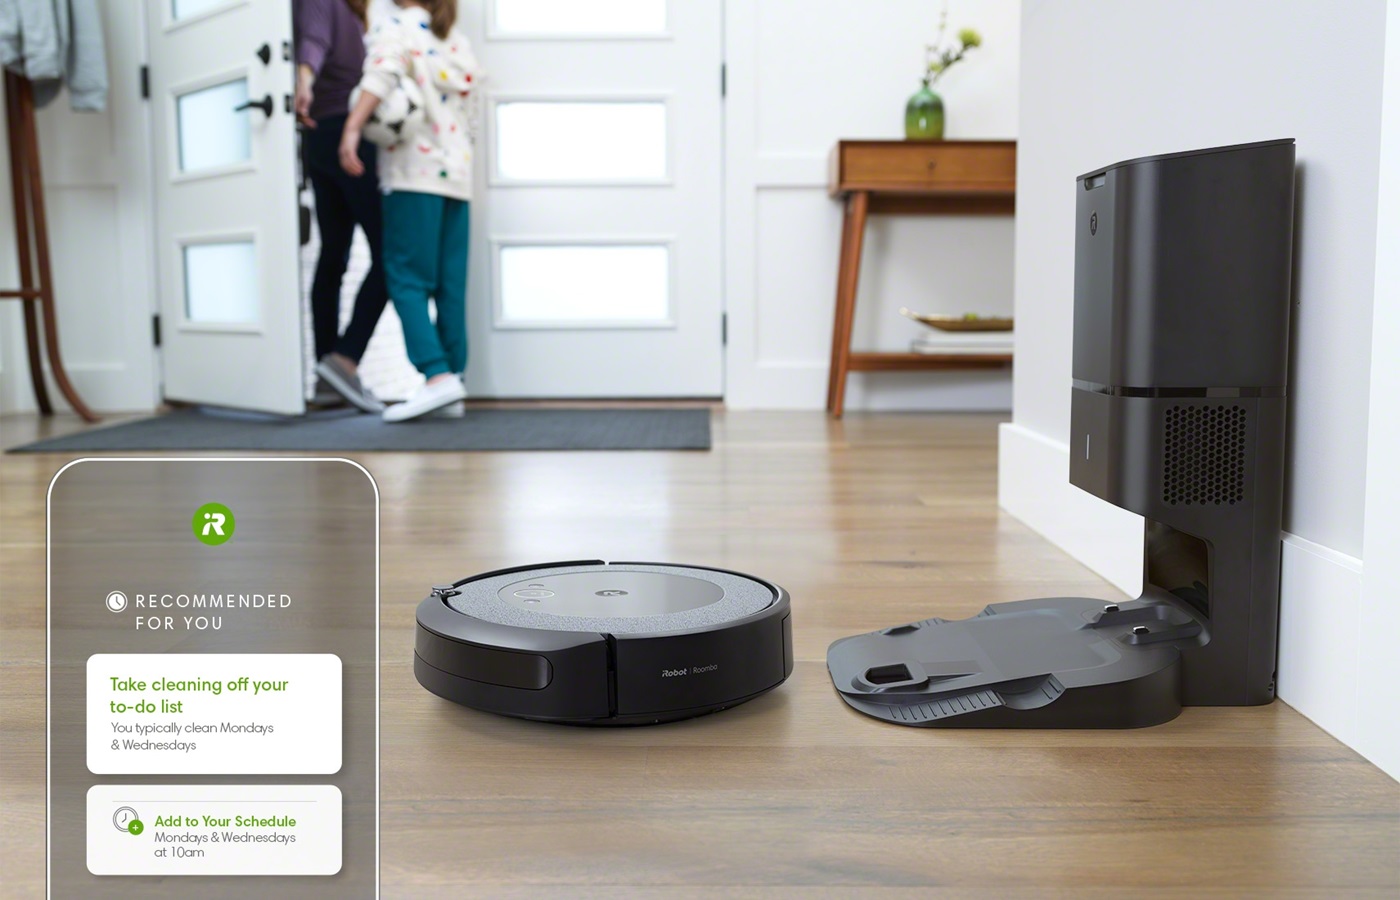 why-amazon-acquiring-irobot-is-awesome-for-customers-or-digital-trends